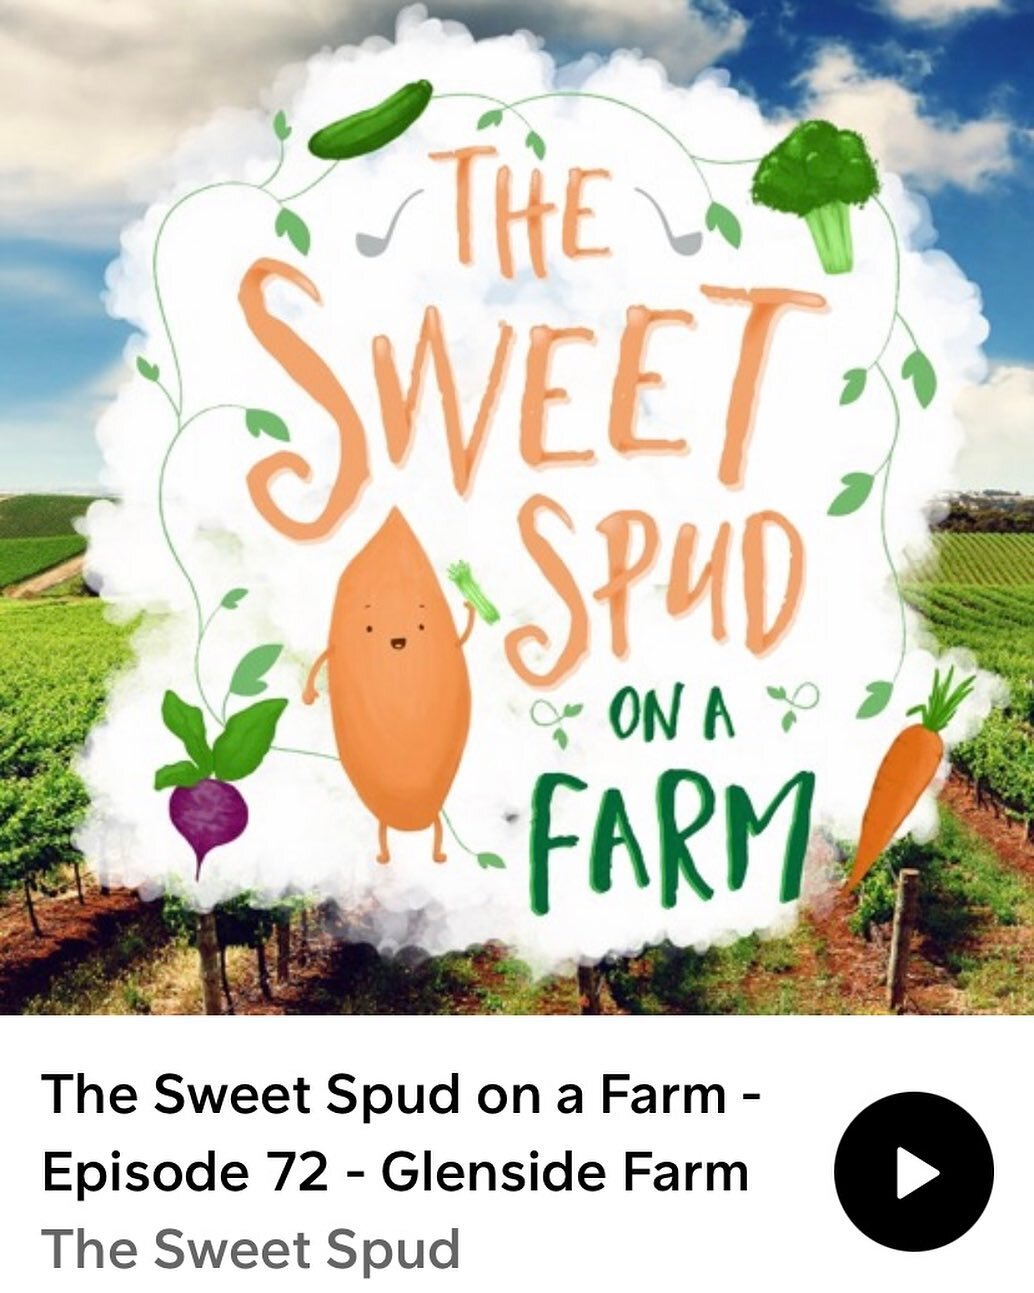 Great to spend some time with @thesweetspud_onafarm podcaster Zuzana and share our story of Glenside Farm. Have a listen on SoundCloud. https://soundcloud.com/thesweetspud/the-sweet-spud-on-a-farm-episode-72-glenside-farm #podcast #thesweetspudonafar